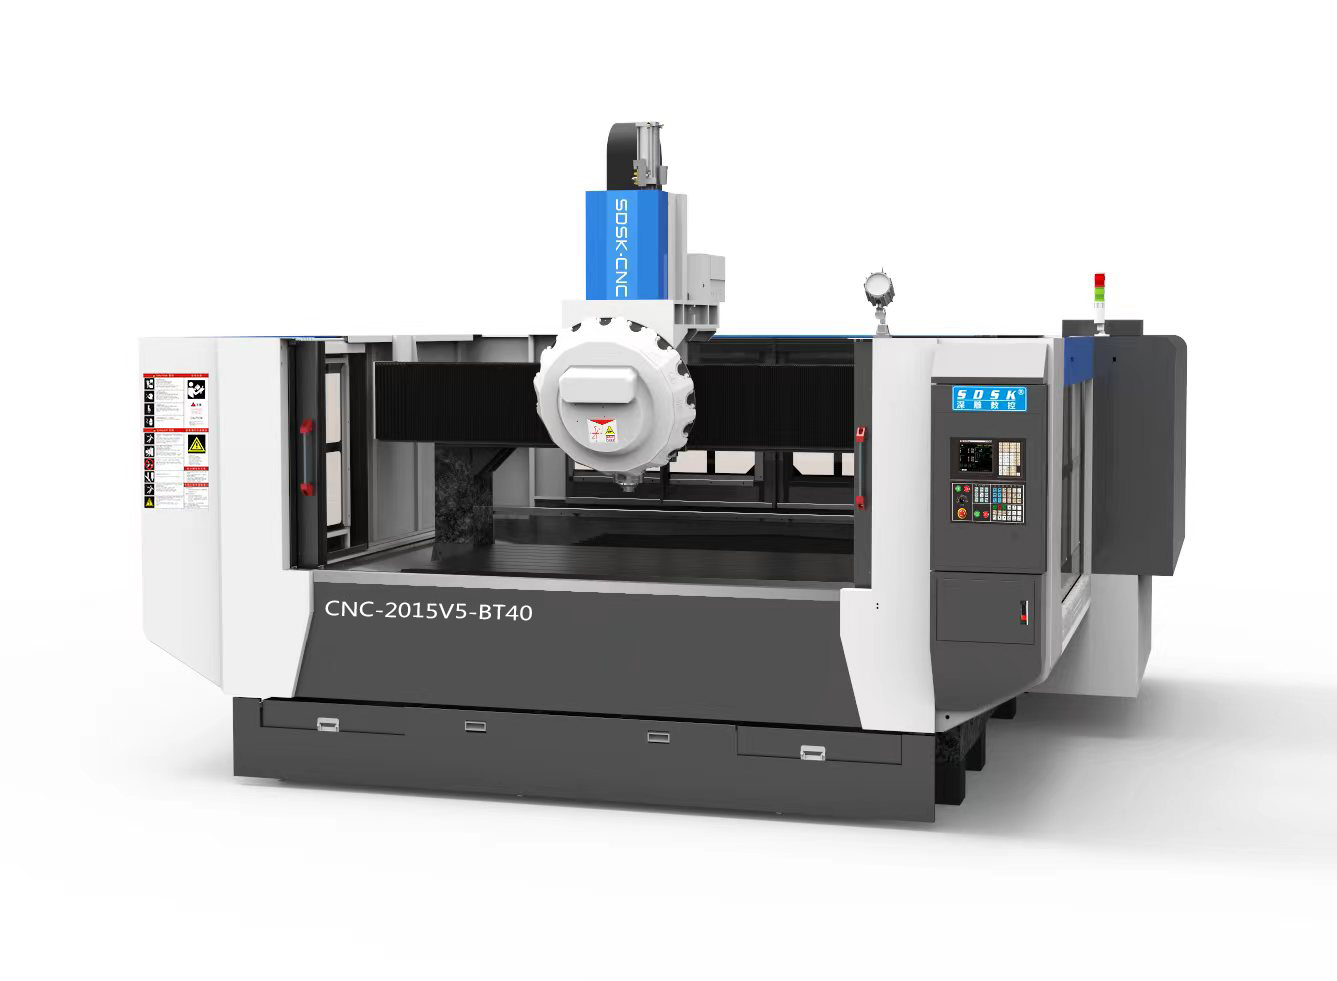 Application knowledge of horizontal machining centers